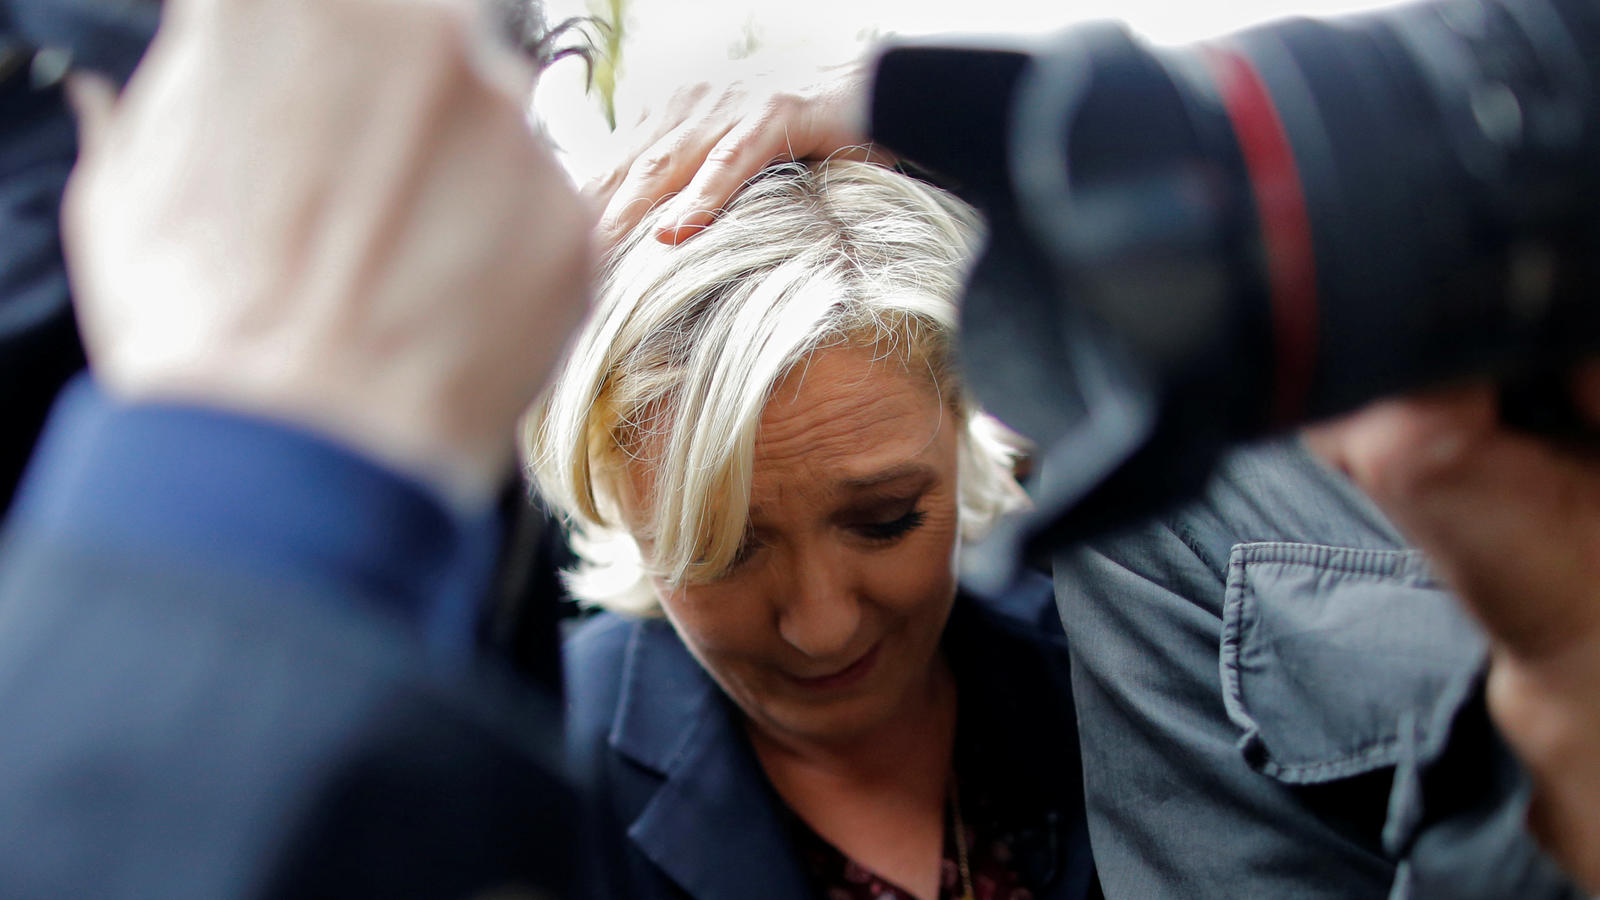 Marine Le Pen, French National Front (FN) party candidate for 2017 presidential election, is protected by bodyguards as eggs are thrown by demonstrators during her arrival in Dol-de-Bretagne, France, May 4, 2017.   REUTERS/Stephane Mahe